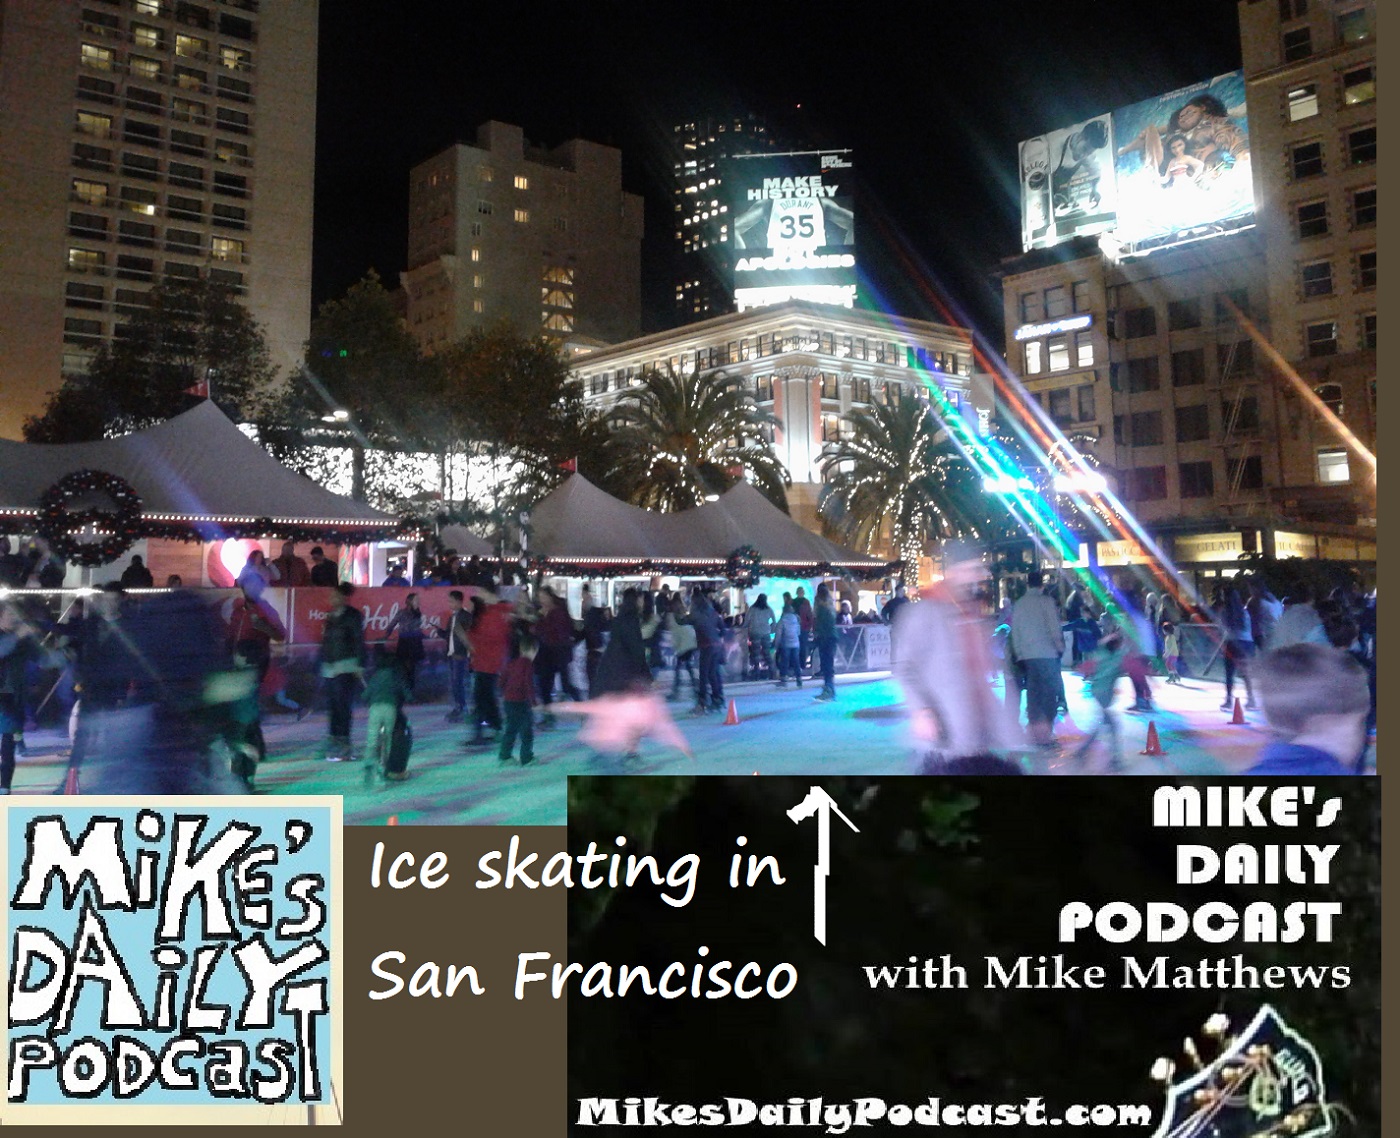 mikes-daily-podcast-1224-union-square-iceskating